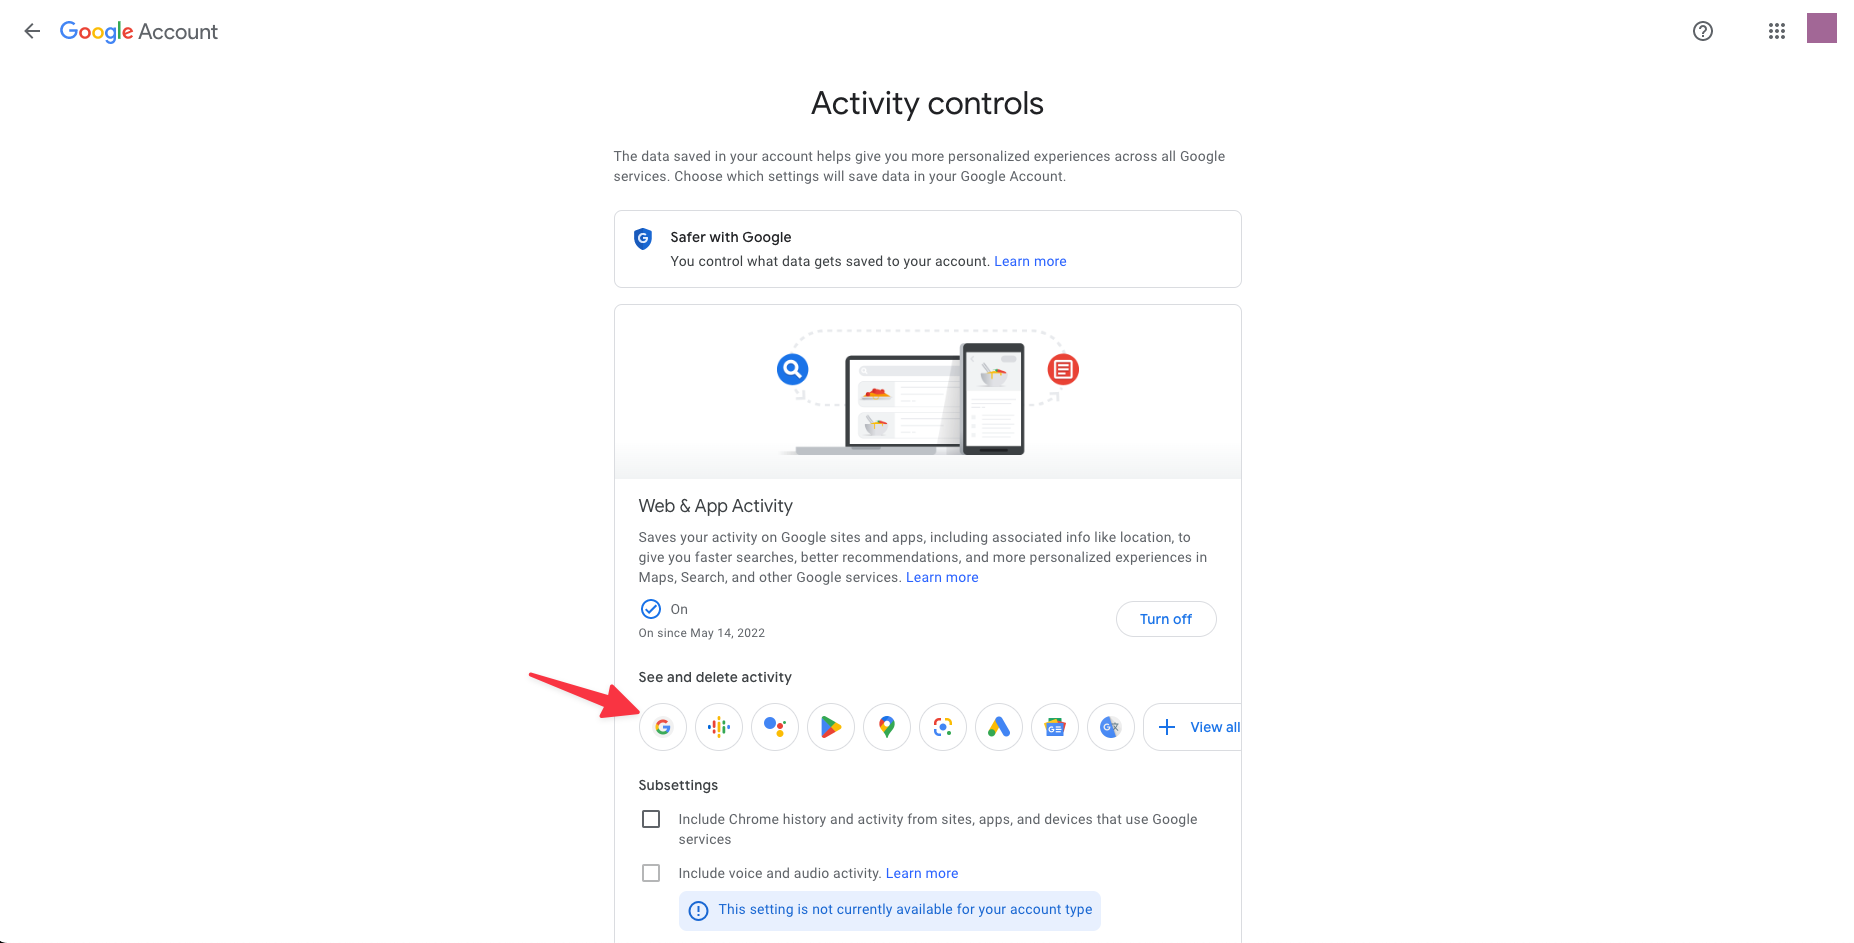 Remote.tools shows how to clear Google search history from your Google Account. Click on Google search icon to delete only Google search related activity from your Google account